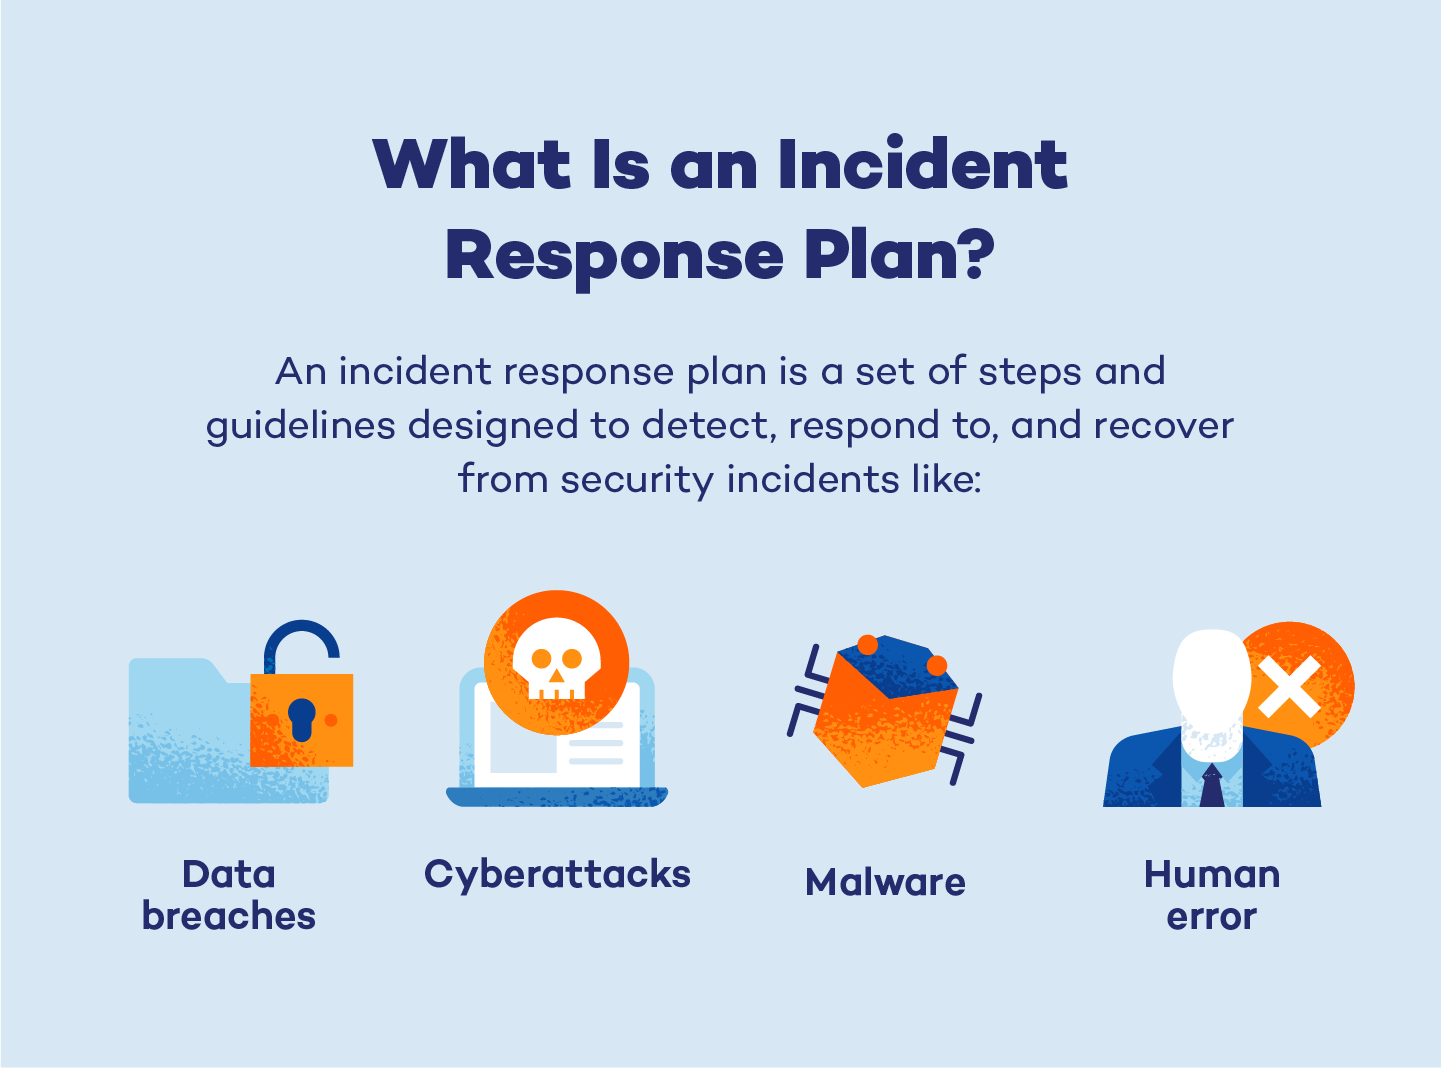 The five phases of an incident response plan include preparation, detection, containment, recovery, and improvement.